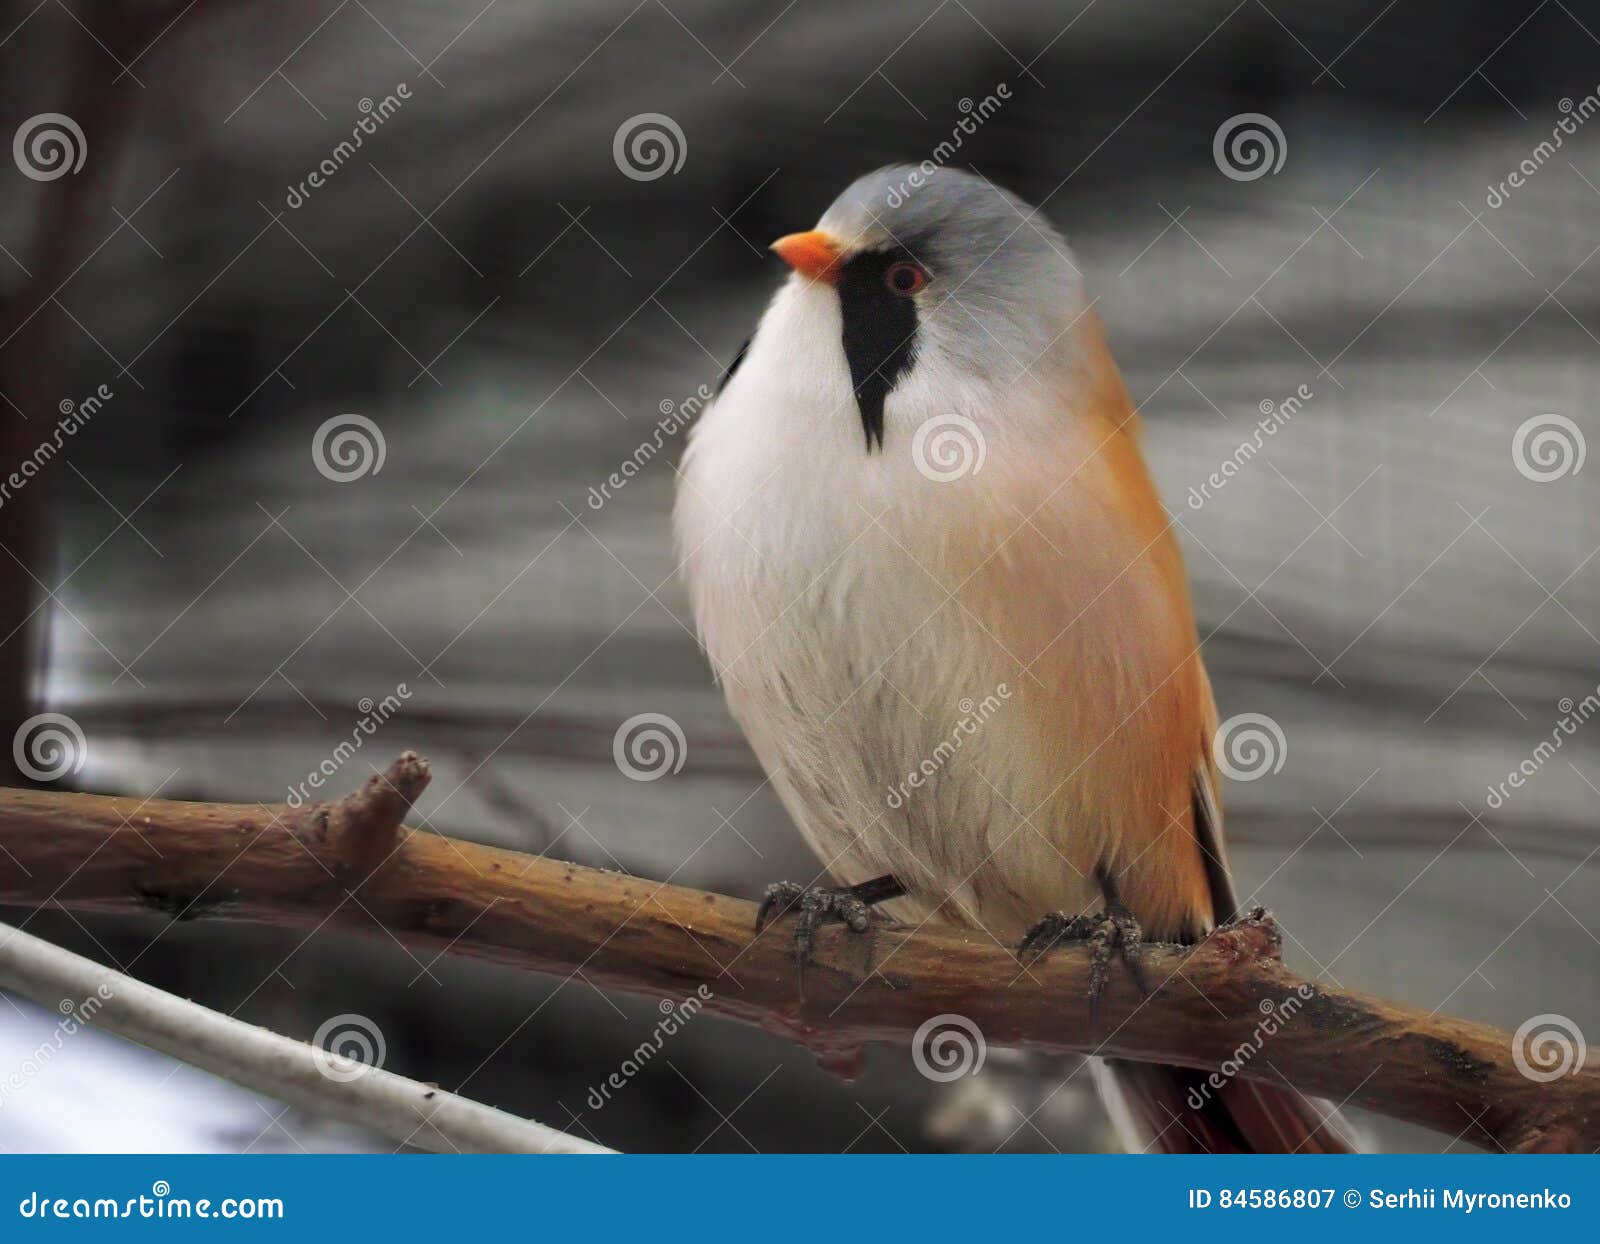 Small Cute Orange and Little Blue Bird Stock Image - Image of